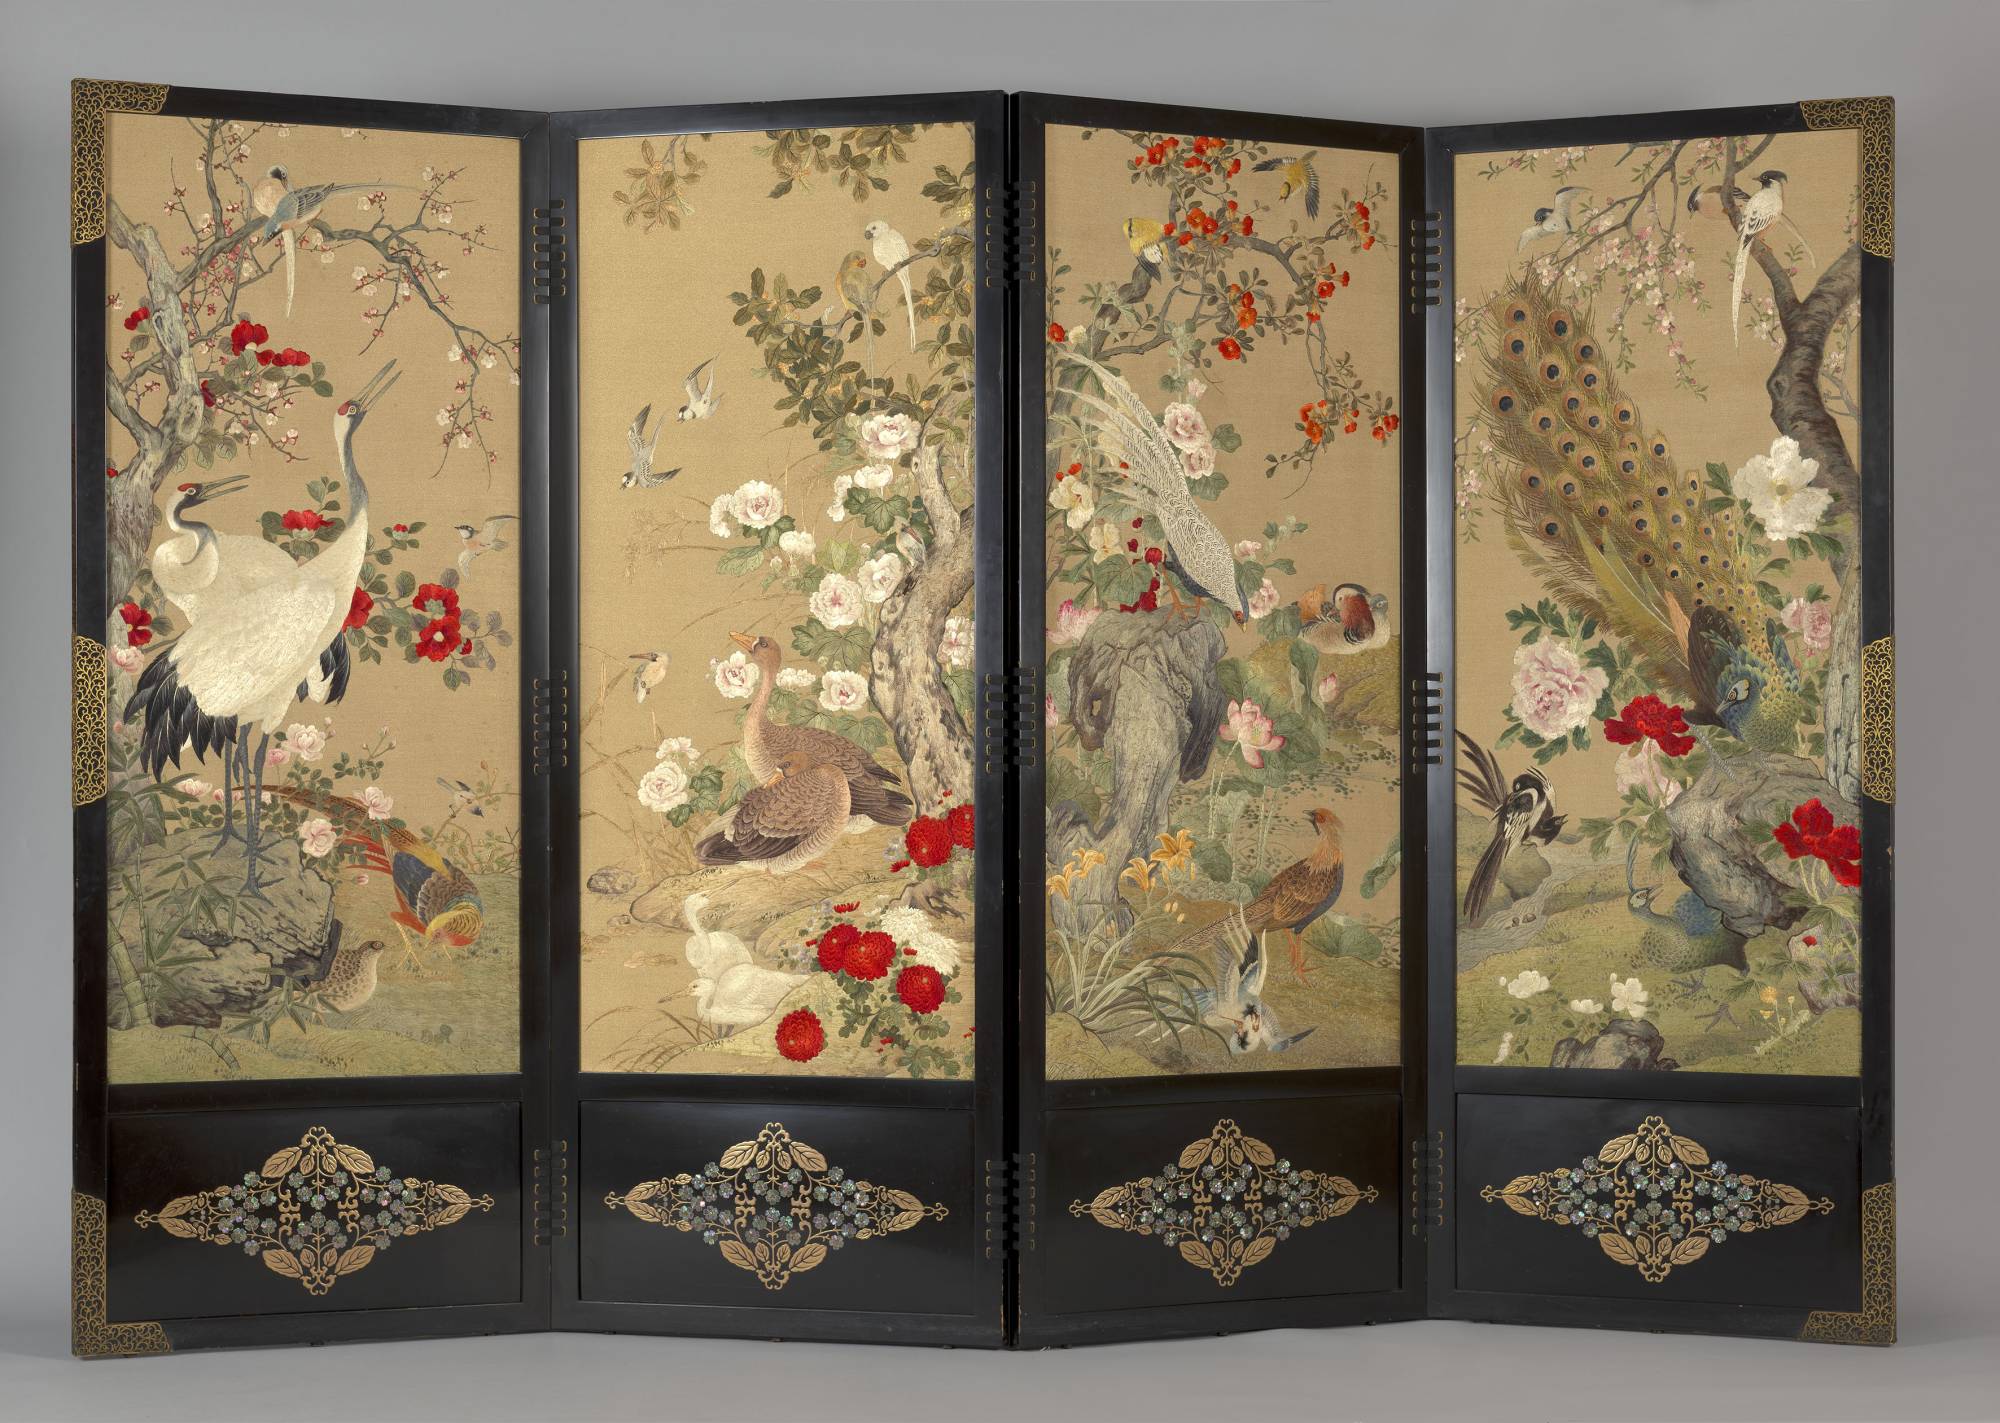 The collection includes an embroidered silk folding screen that was a gift from Emperor Meiji to King Edward VII in 1902. | COURTESY OF THE ROYAL COLLECTION TRUST / COPYRIGHT HER MAJESTY QUEEN ELIZABETH II / VIA KYODO